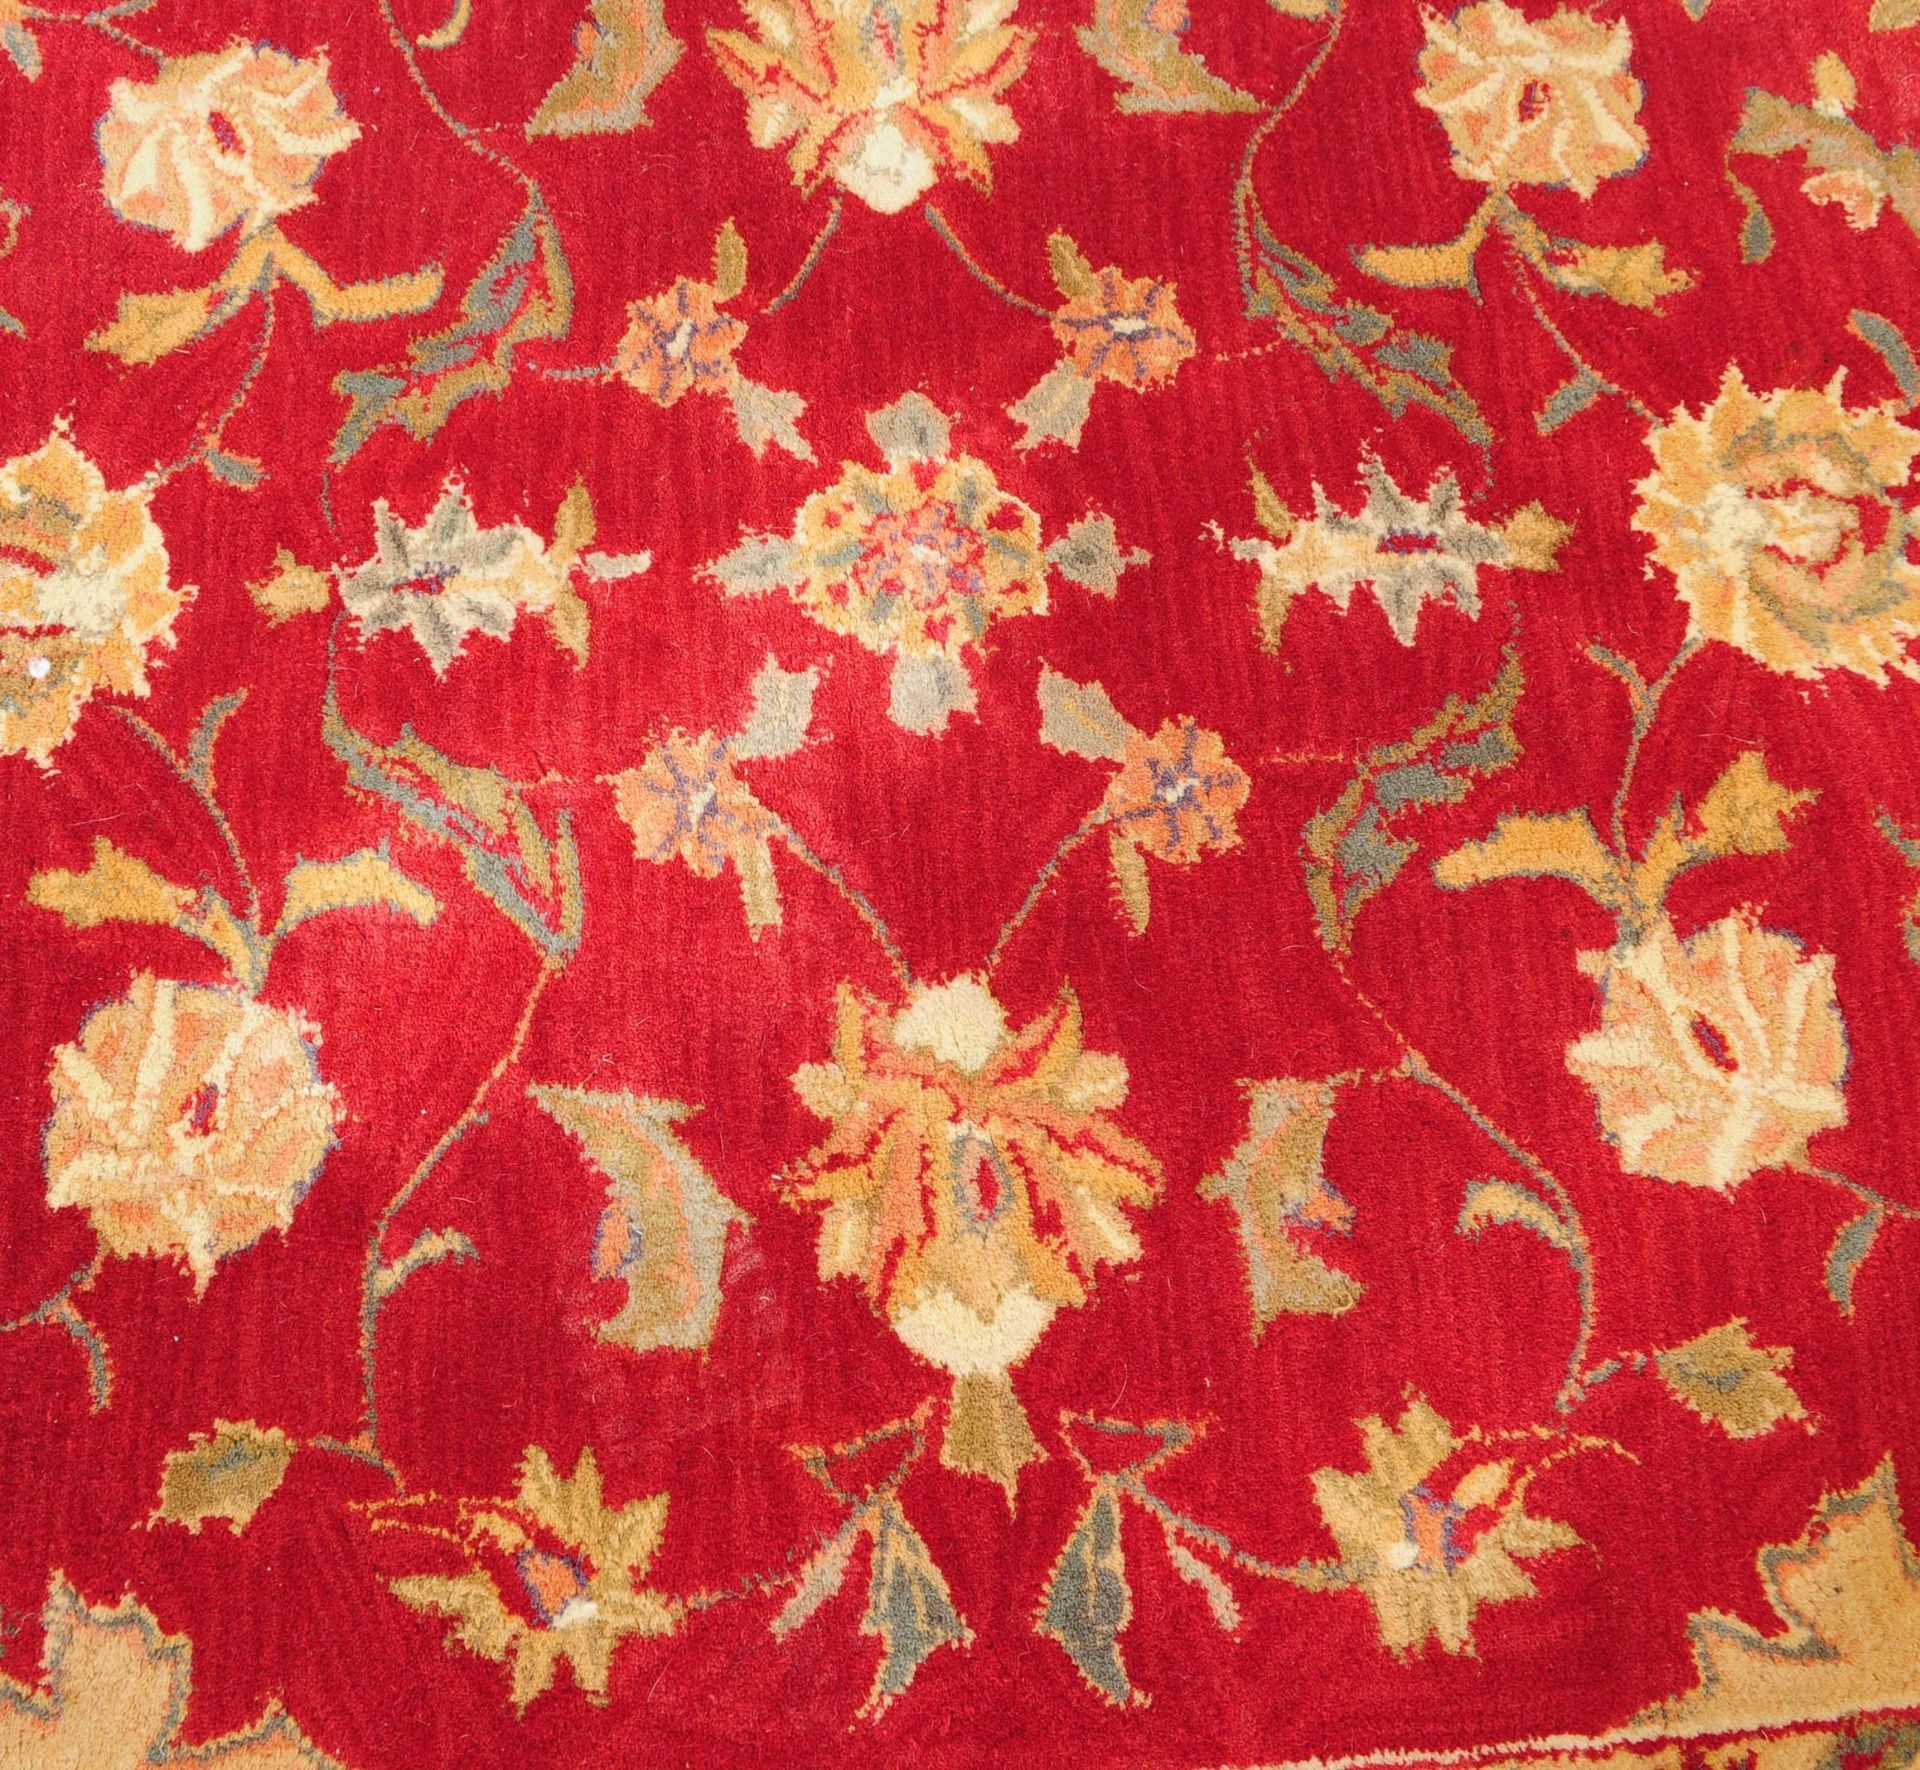 MID TO LATE 20TH CENTURY RECTANGULAR FLORAL RUG CARPET - Image 3 of 4